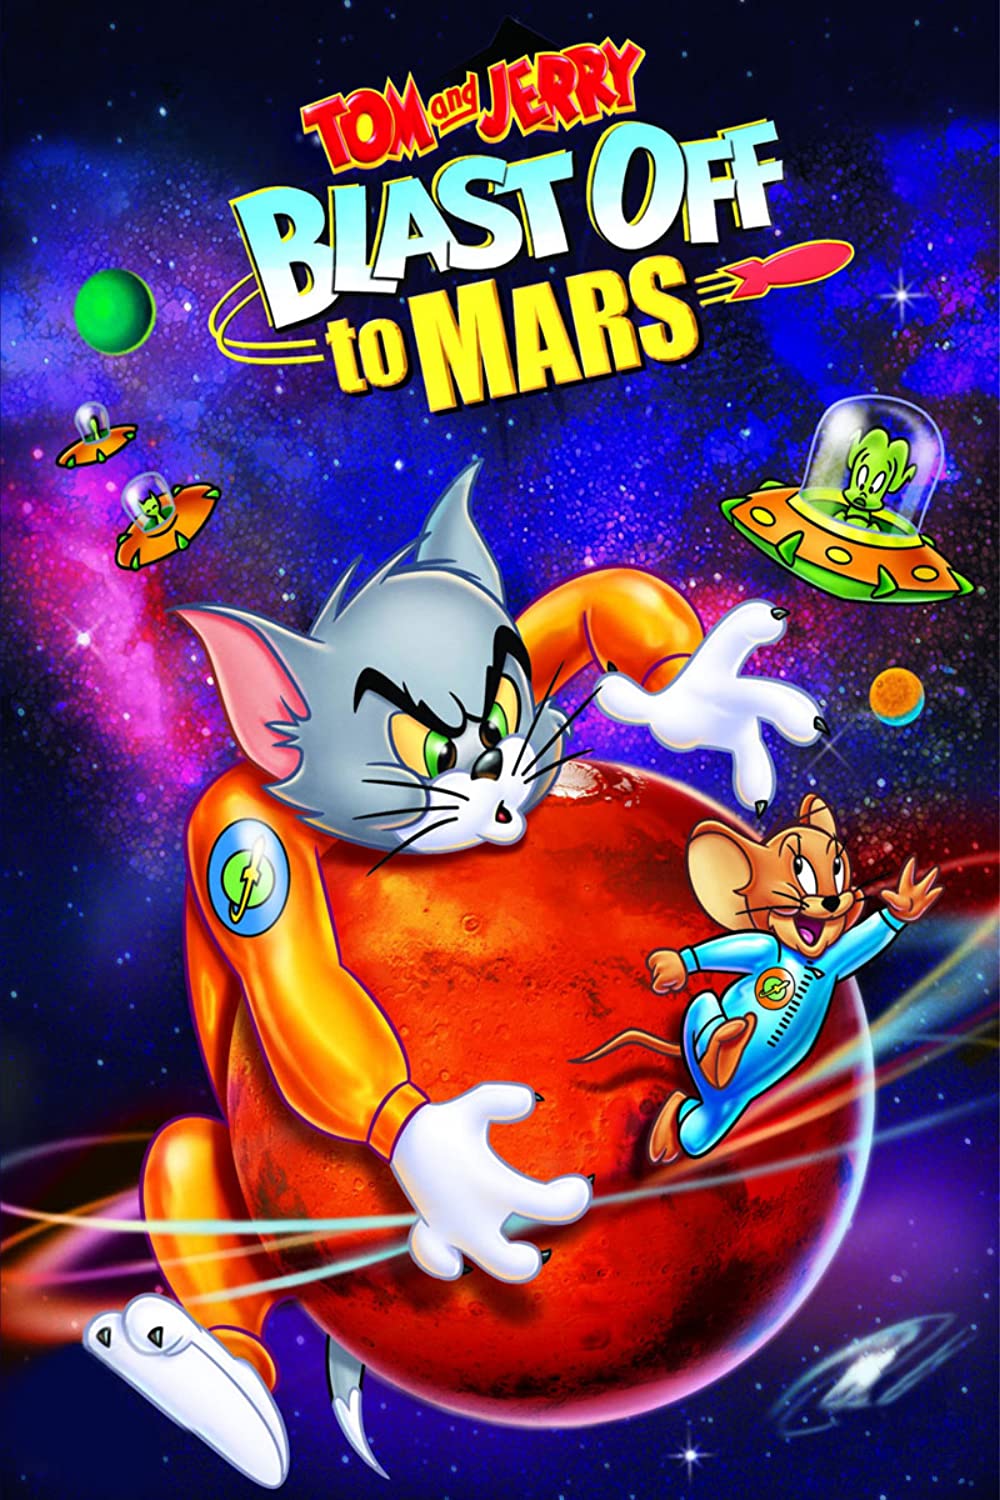 Download Tom and Jerry Blast Off to Mars! Movie | Tom And Jerry Blast Off To Mars!